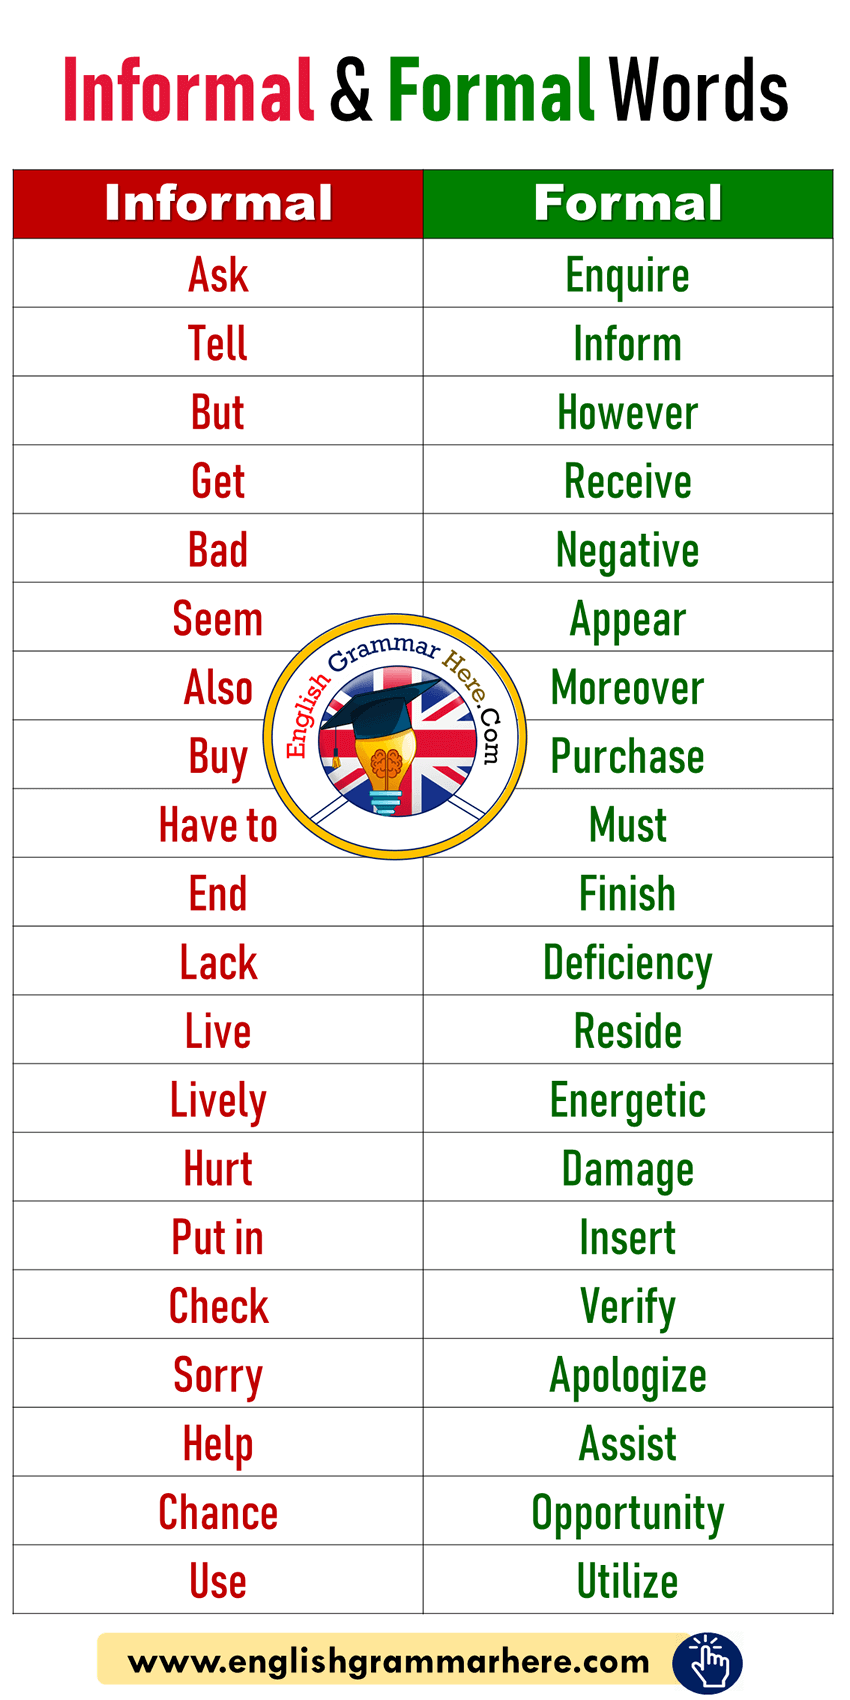 Informal and Formal Words in English